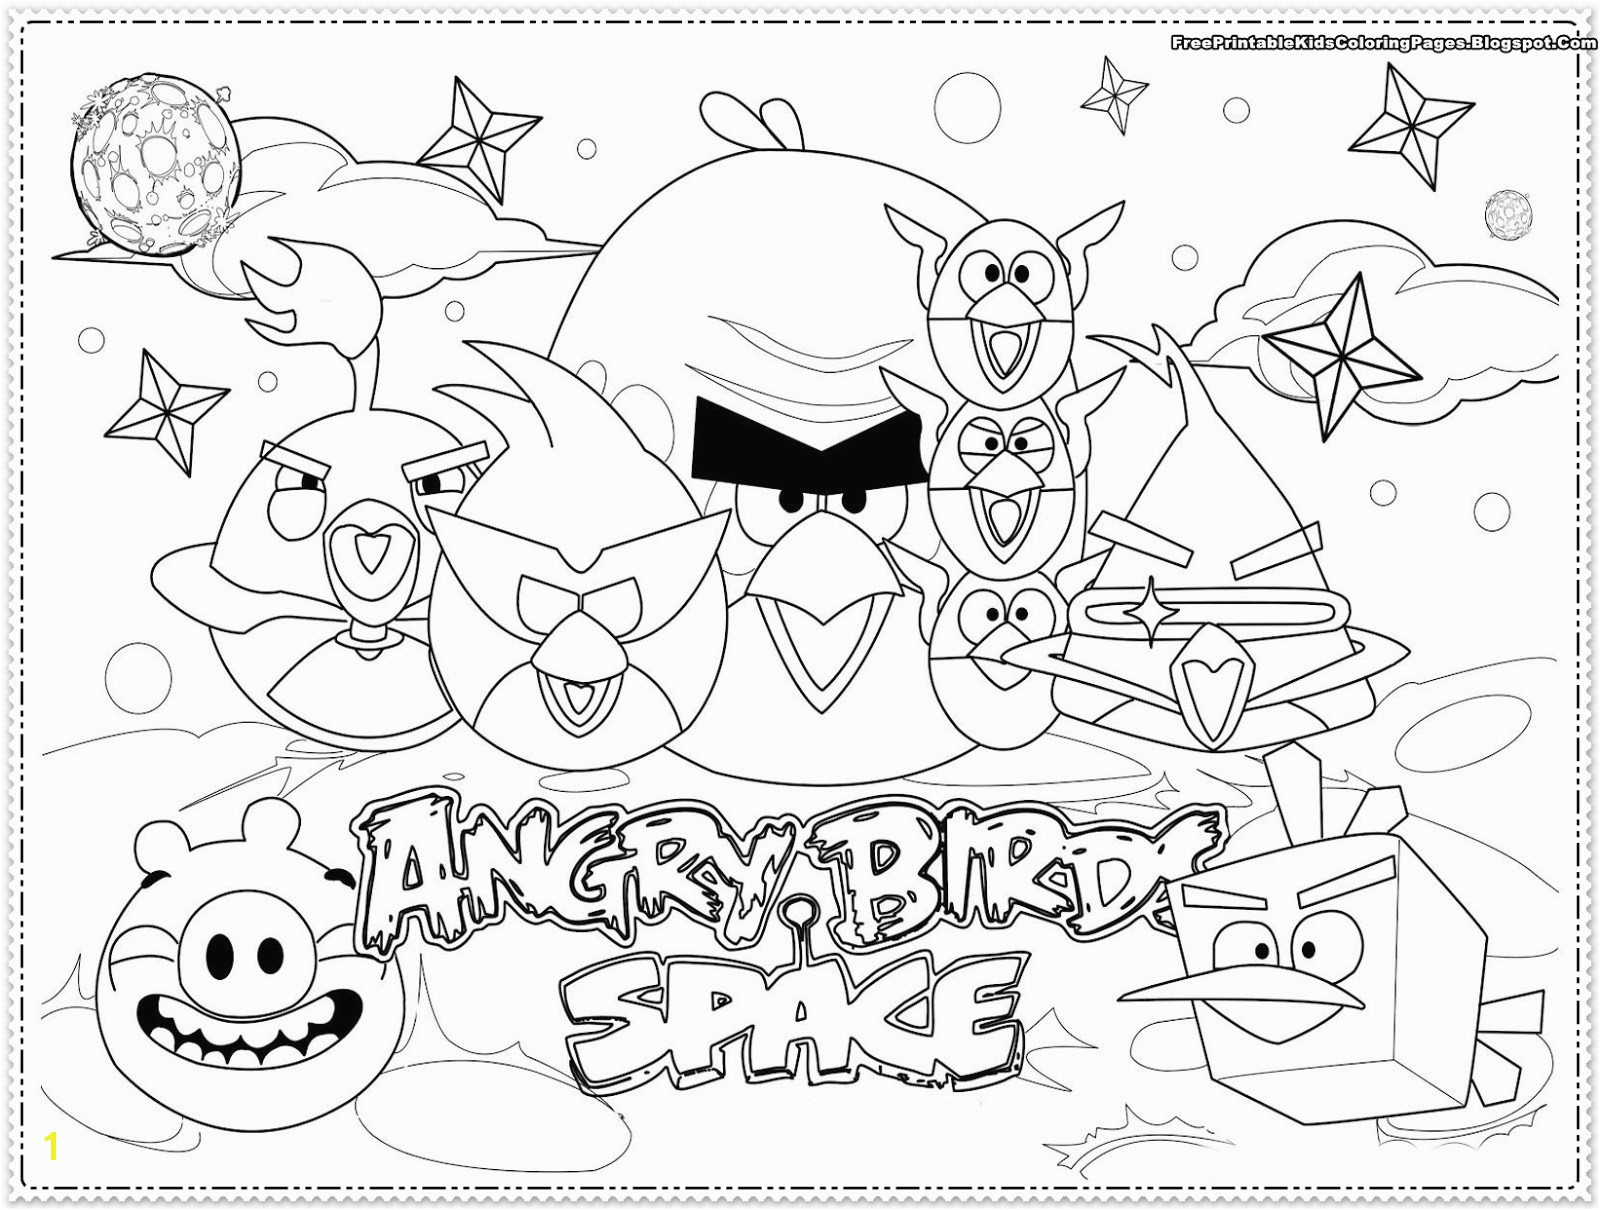 Cartoon Drawing Angry Birds Inspirational Angry Birds Bad Piggies Coloring Pages C Trade Me